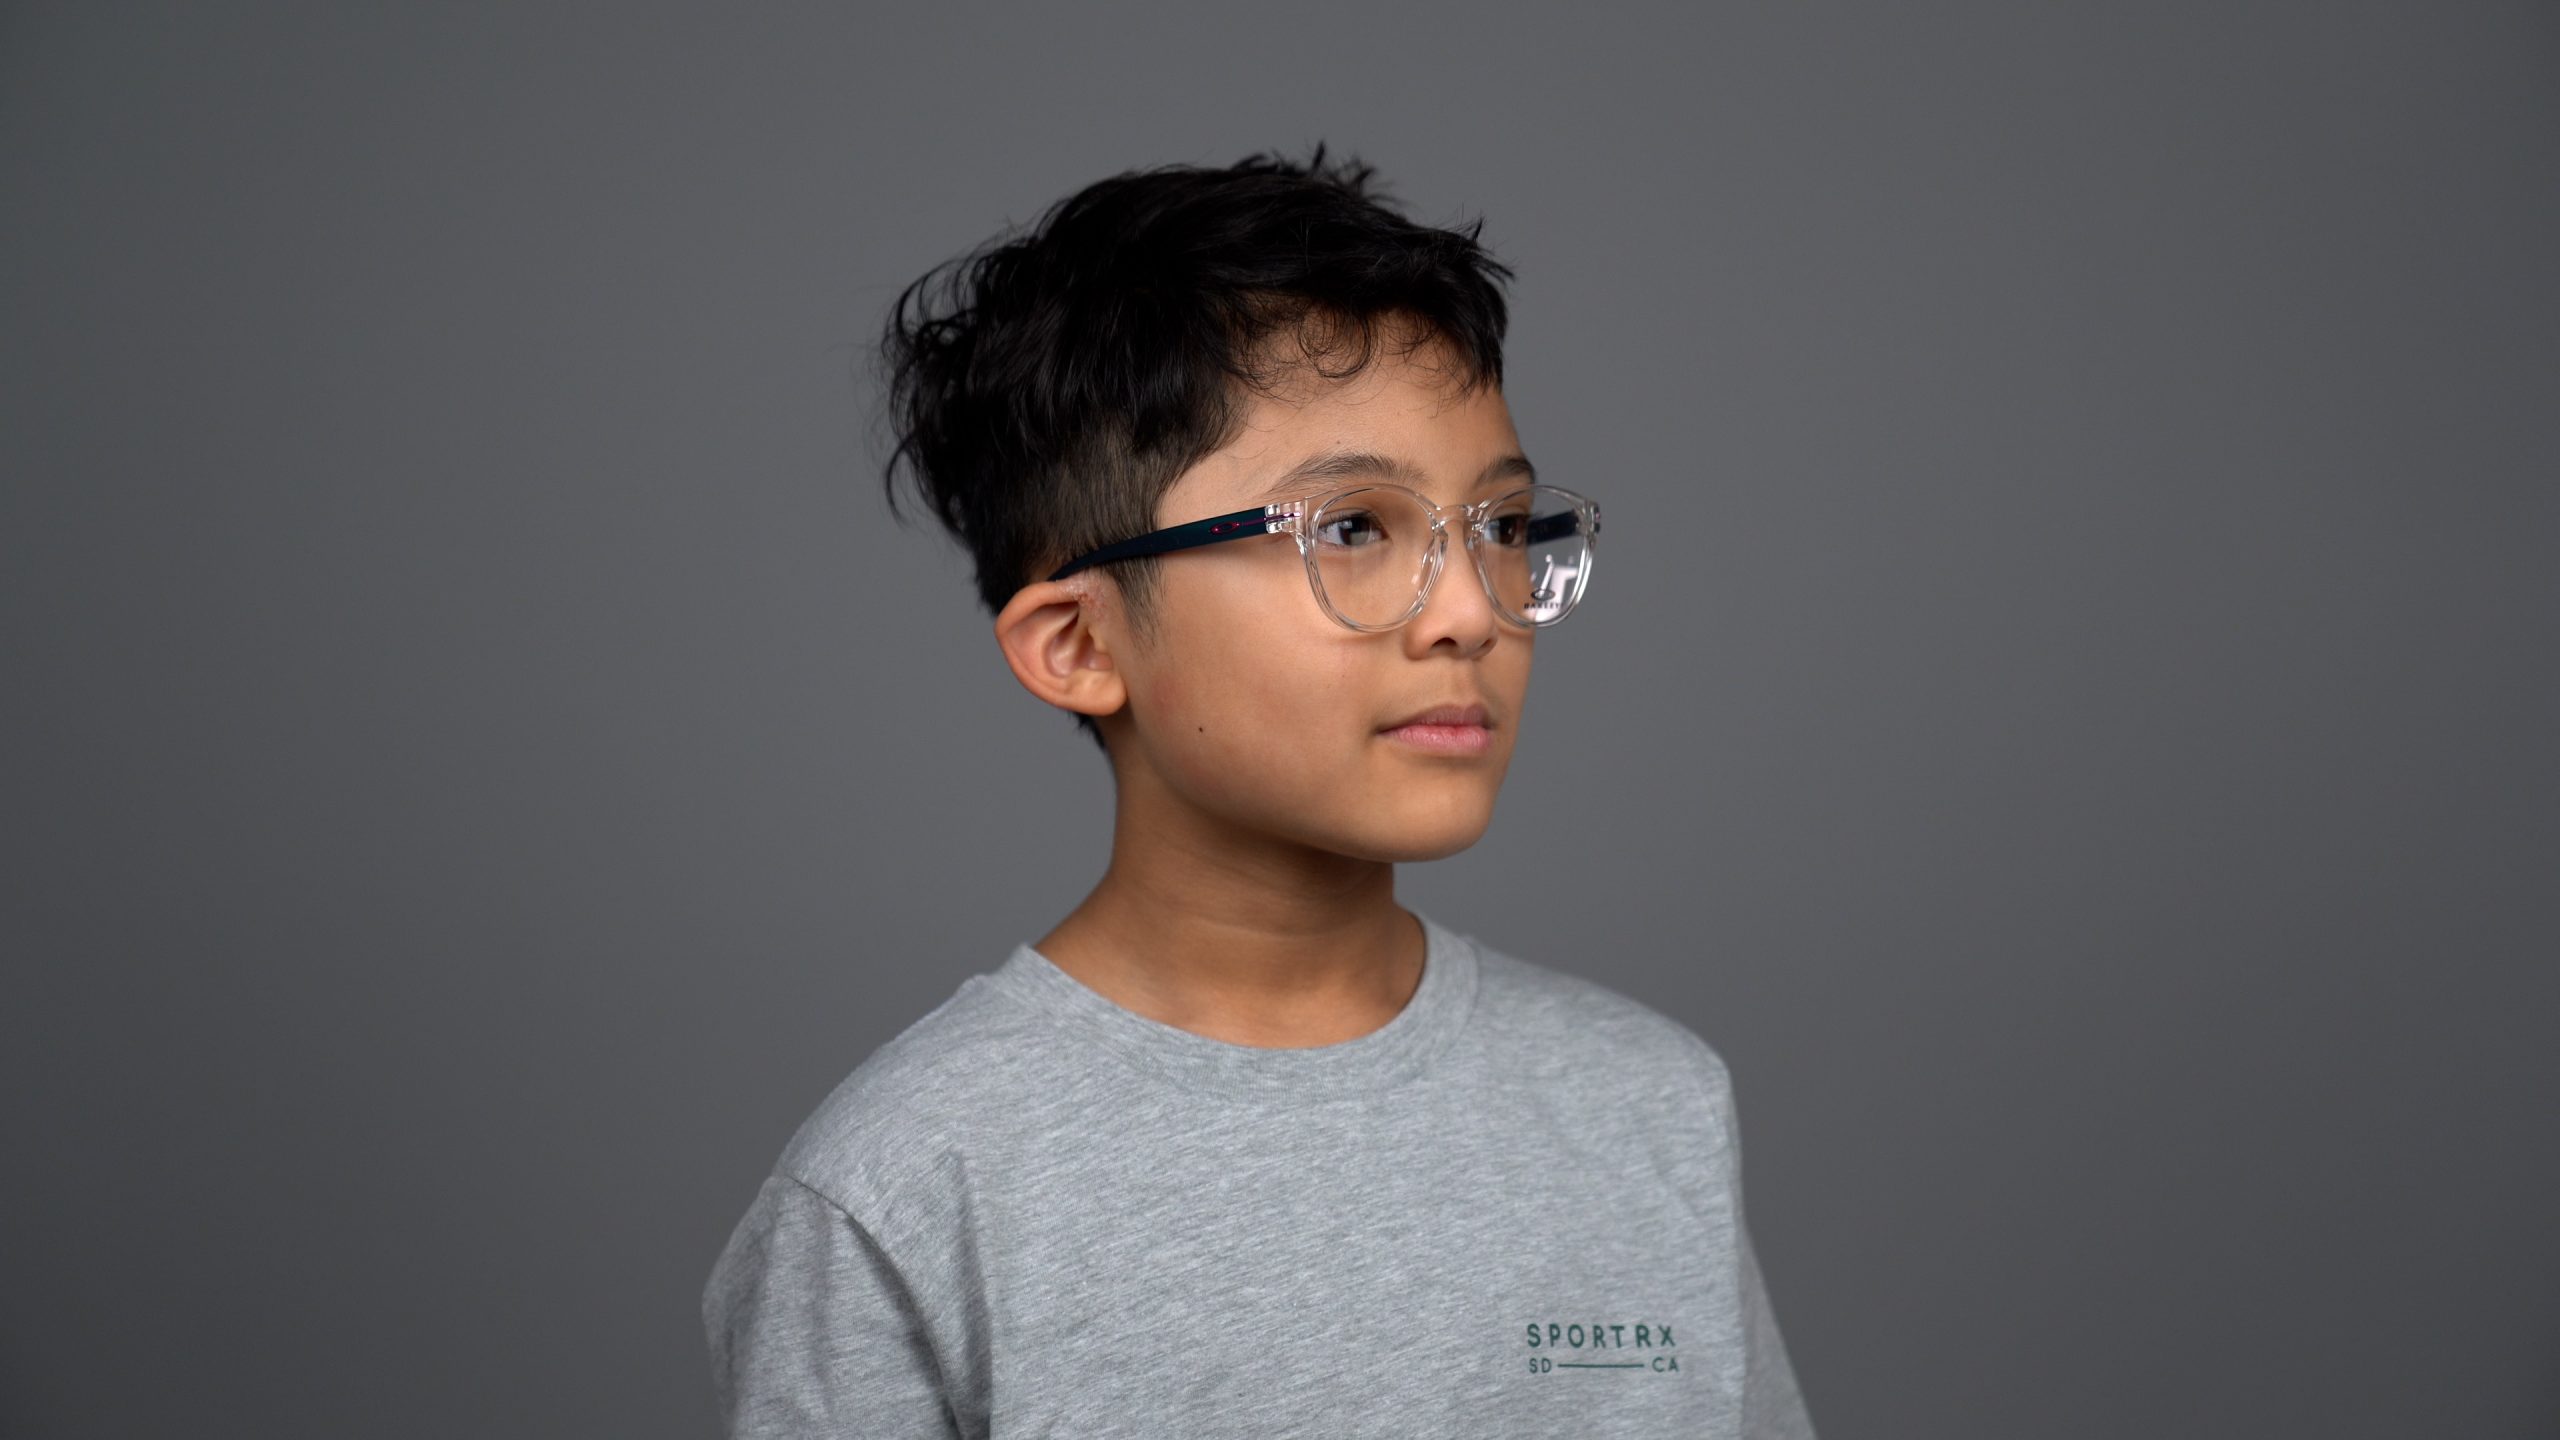 Oakley's Best Glasses for Kids | Protect Their Eyes with Style | SportRx